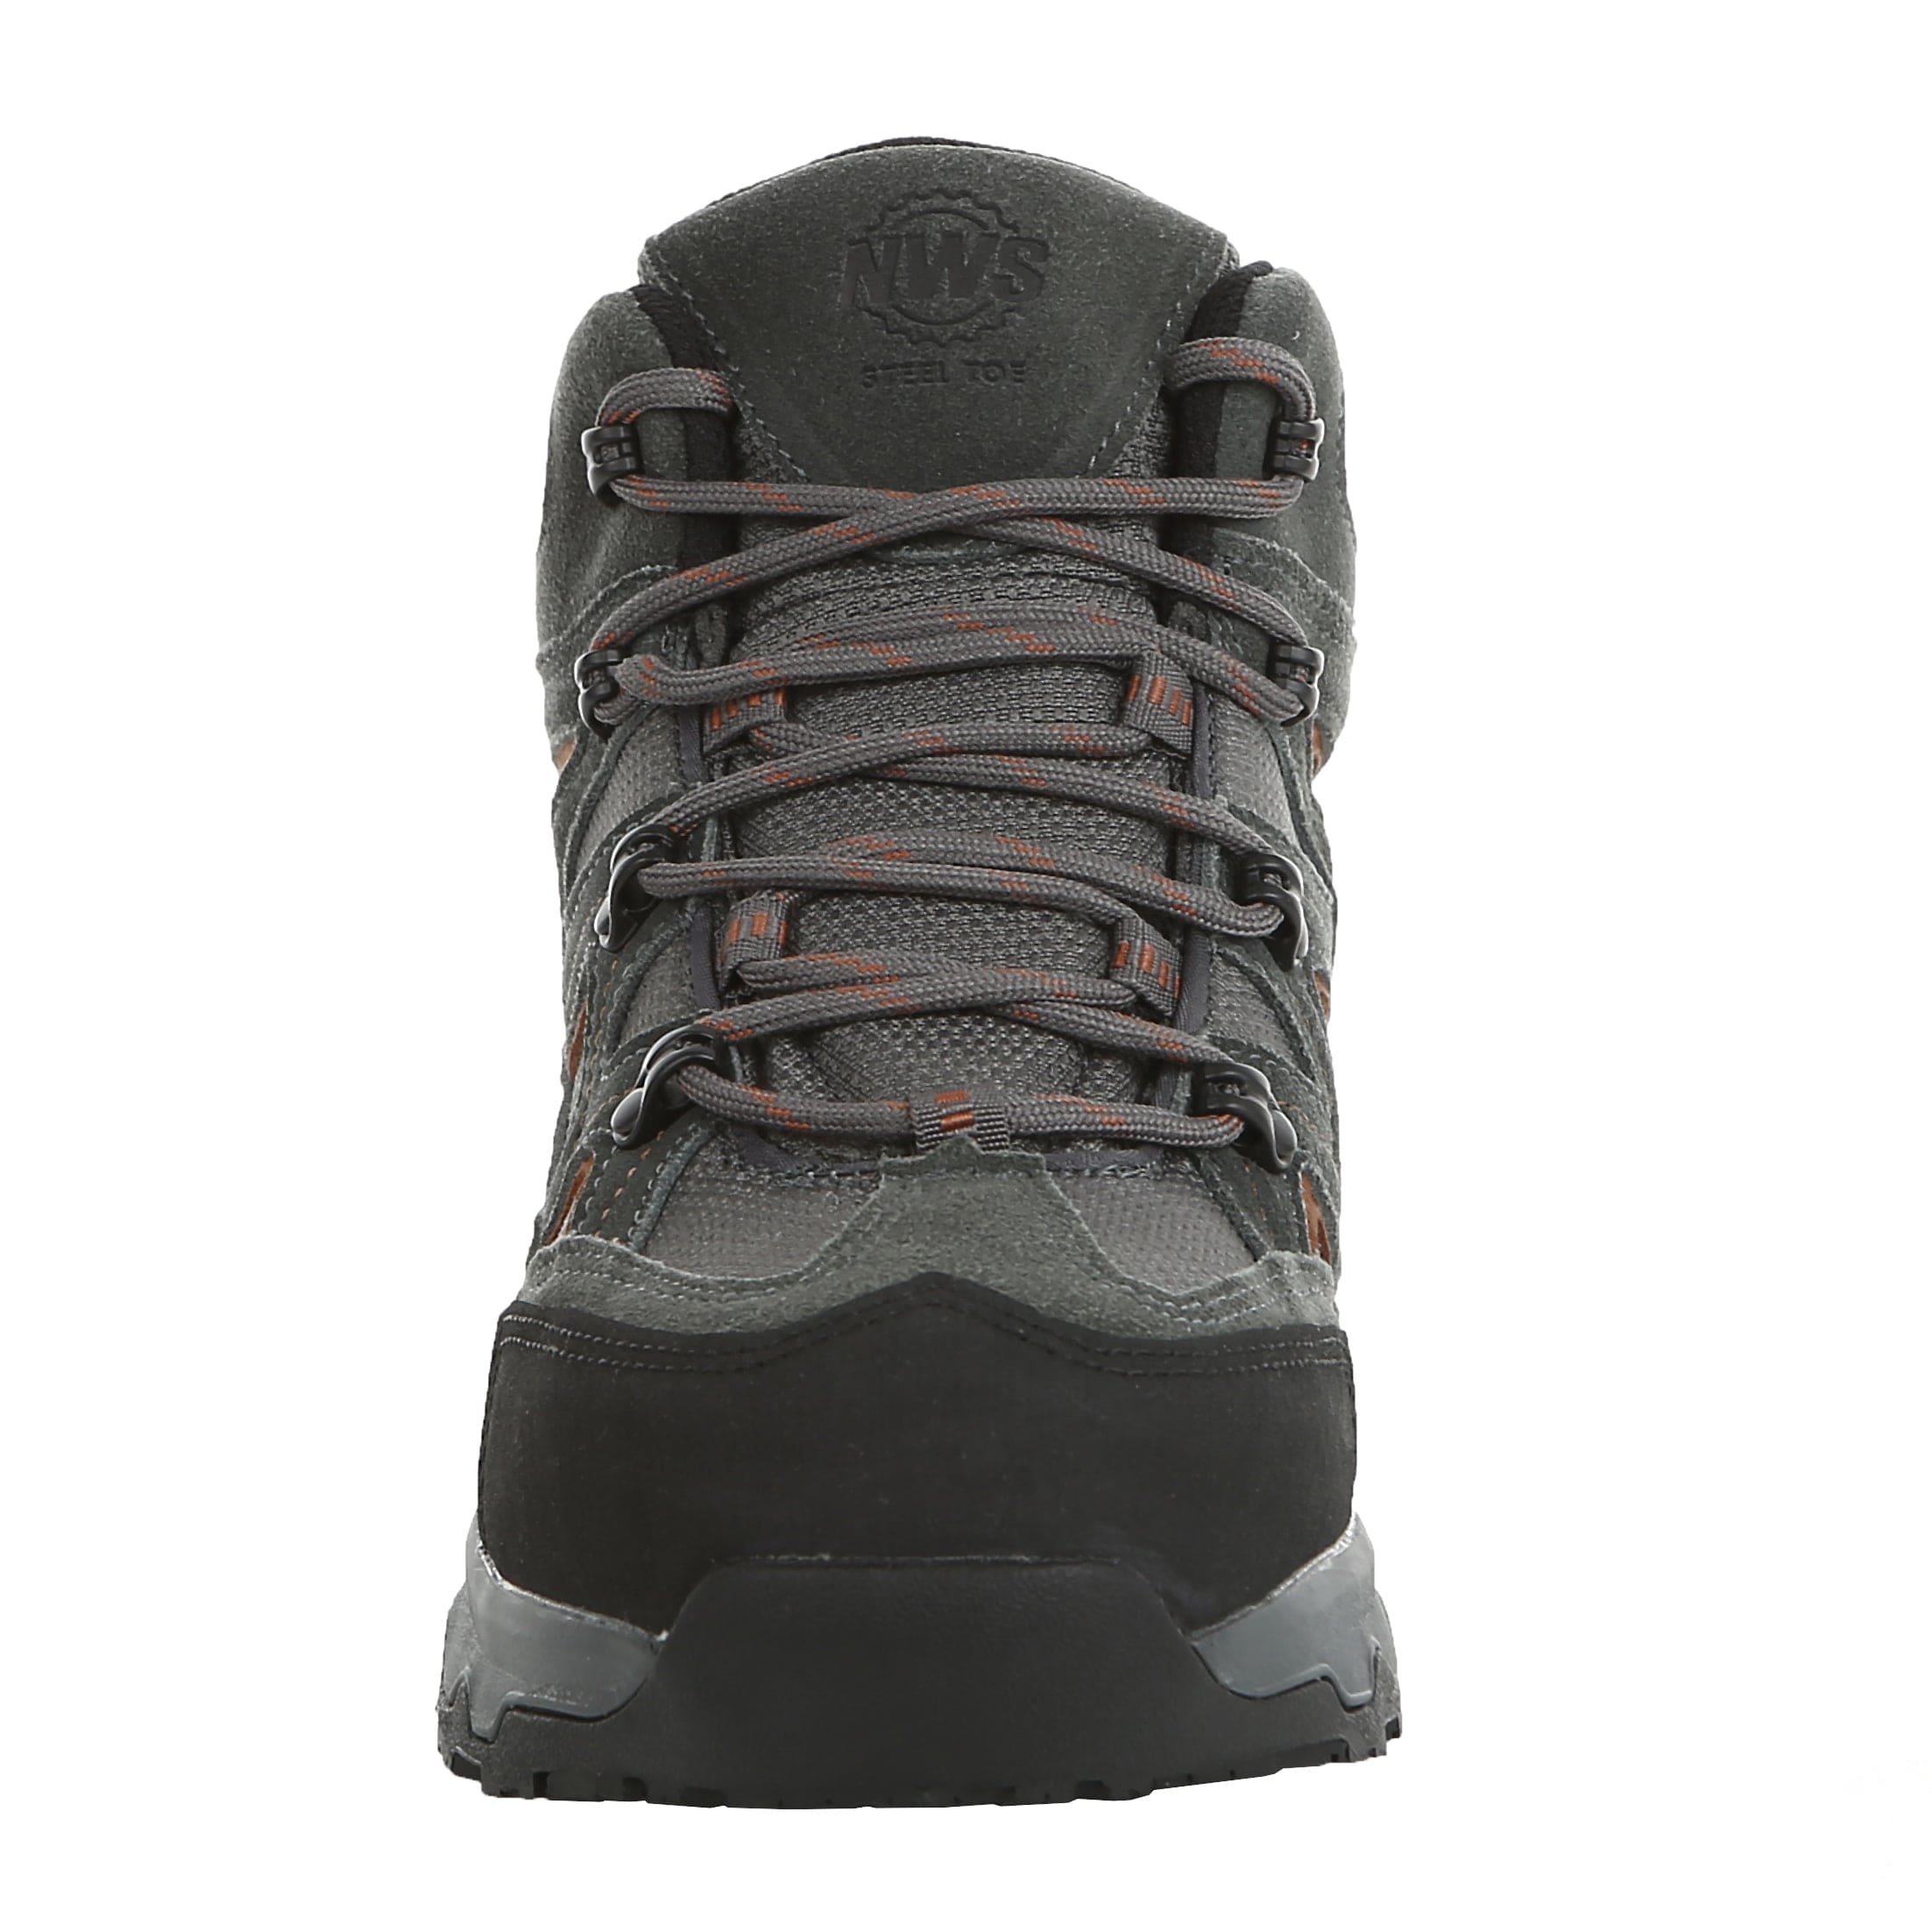 Breathable steel toe work boots for all-day comfort